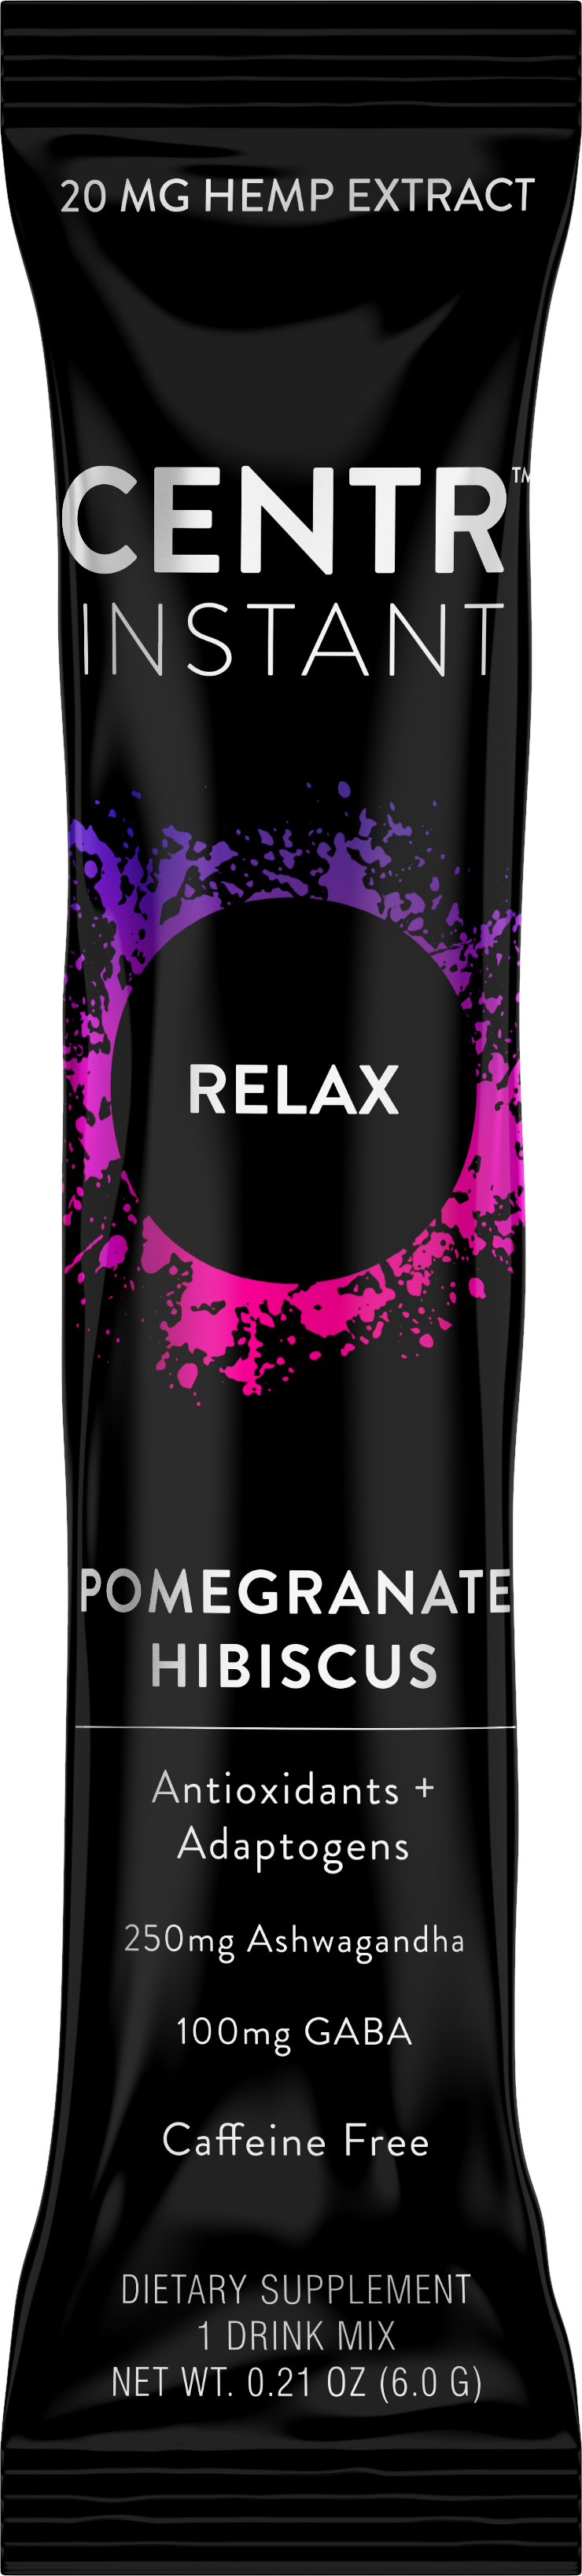 CENTR Instant | Relax